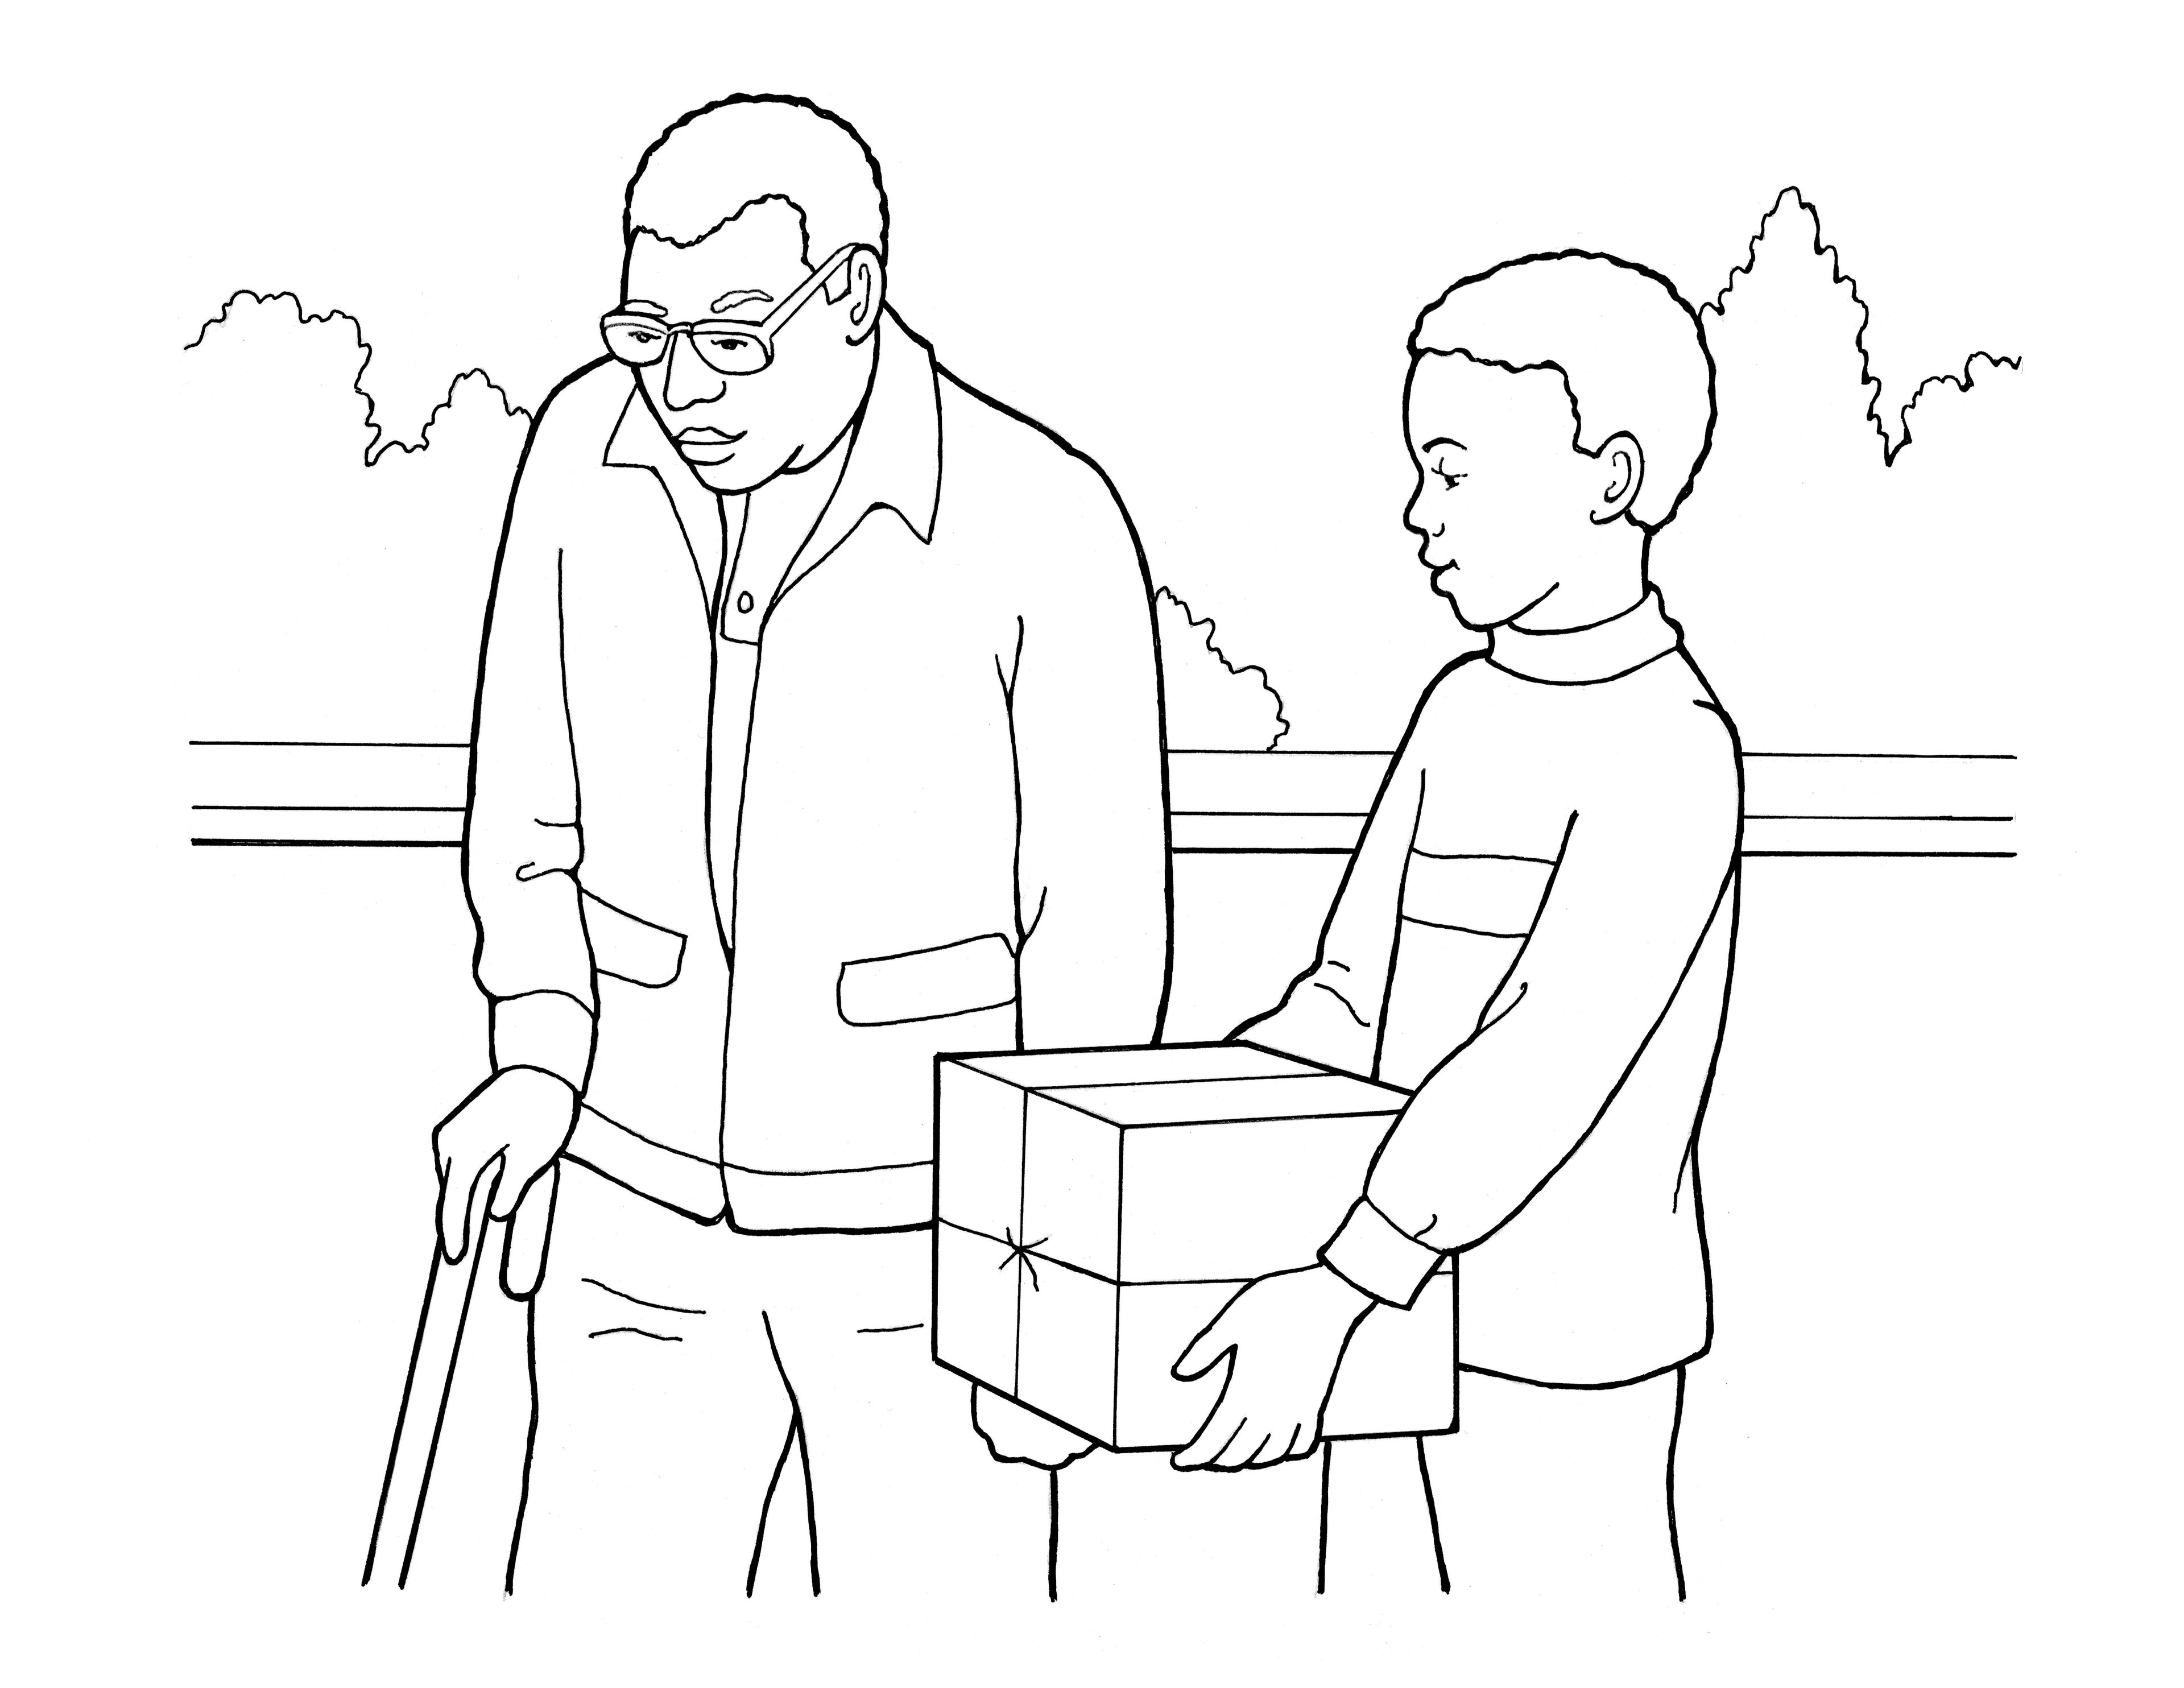 An illustration of a grandson carrying a box for his grandfather.